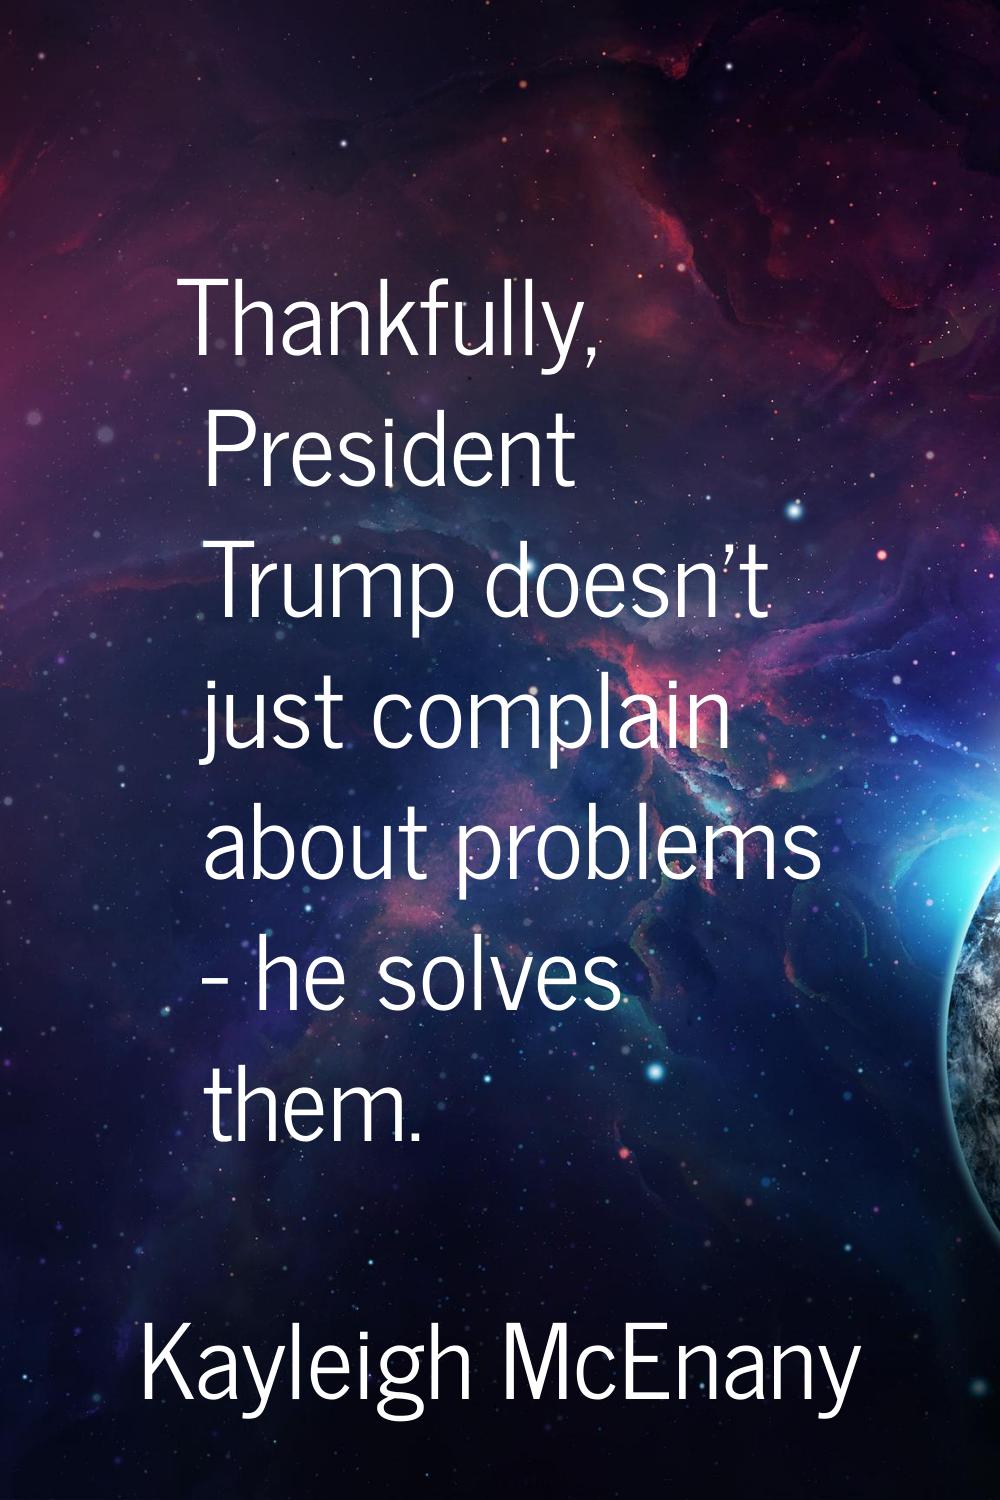 Thankfully, President Trump doesn't just complain about problems - he solves them.